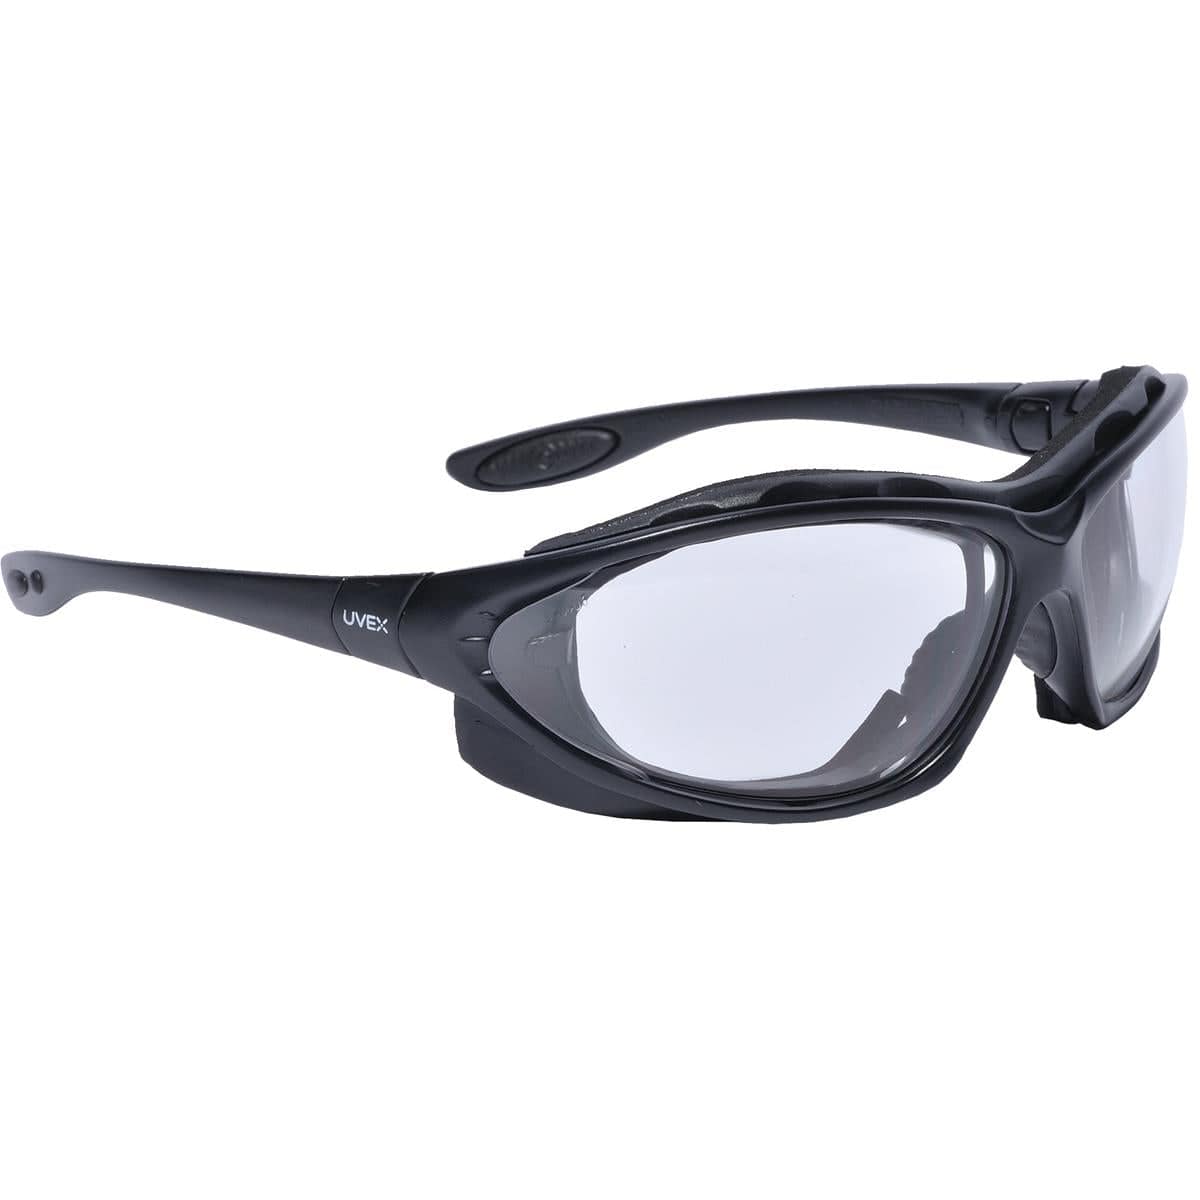 Honeywell Uvex Seismic Sealed Safety Glasses Gemplers